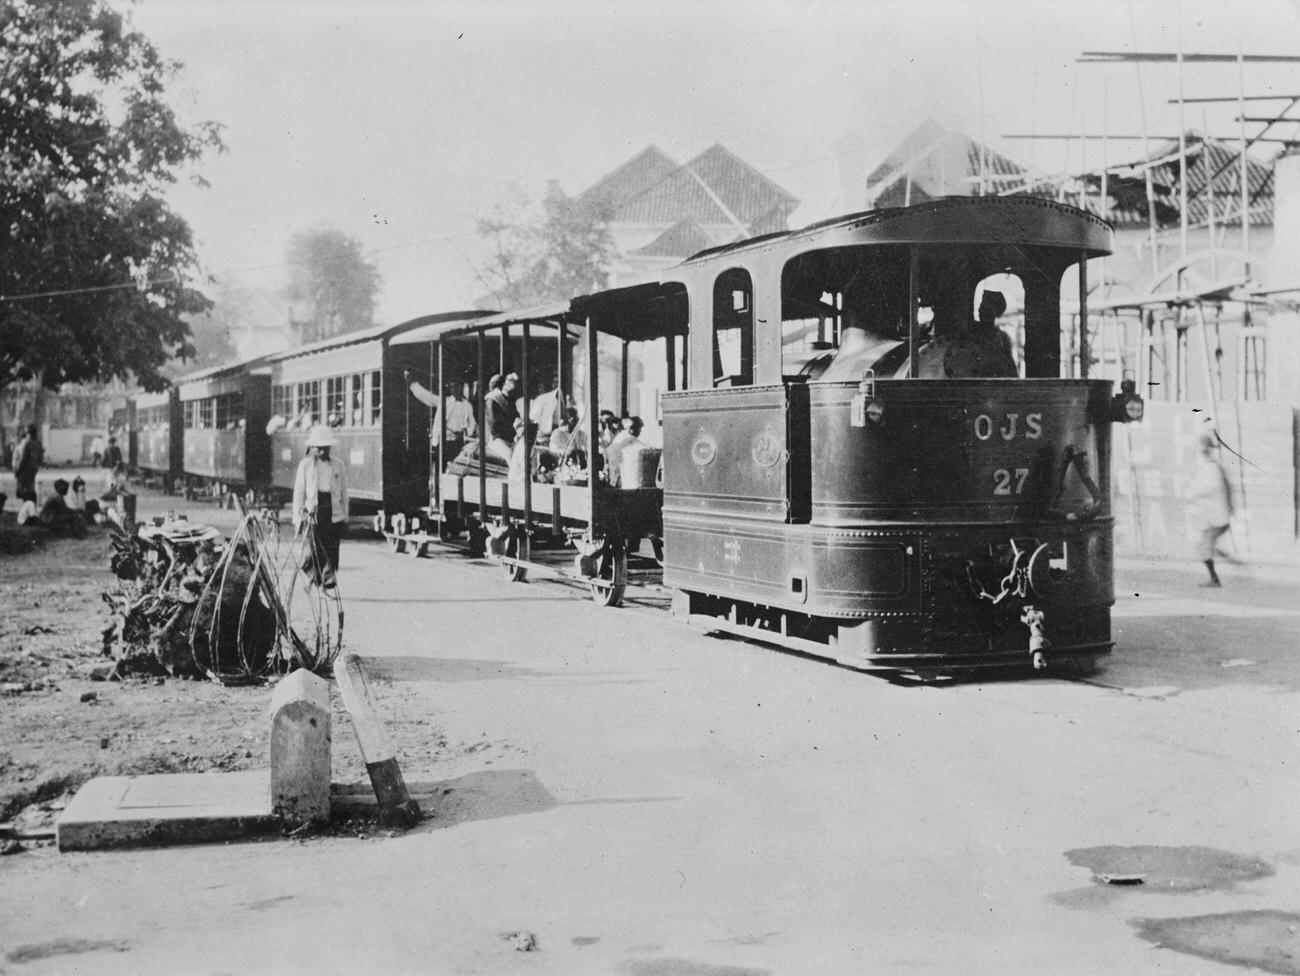 Batavian Railroad Passenger Train in the city that is now Jakarta Indonesia, formerly a Dutch Colony under the name Batavia